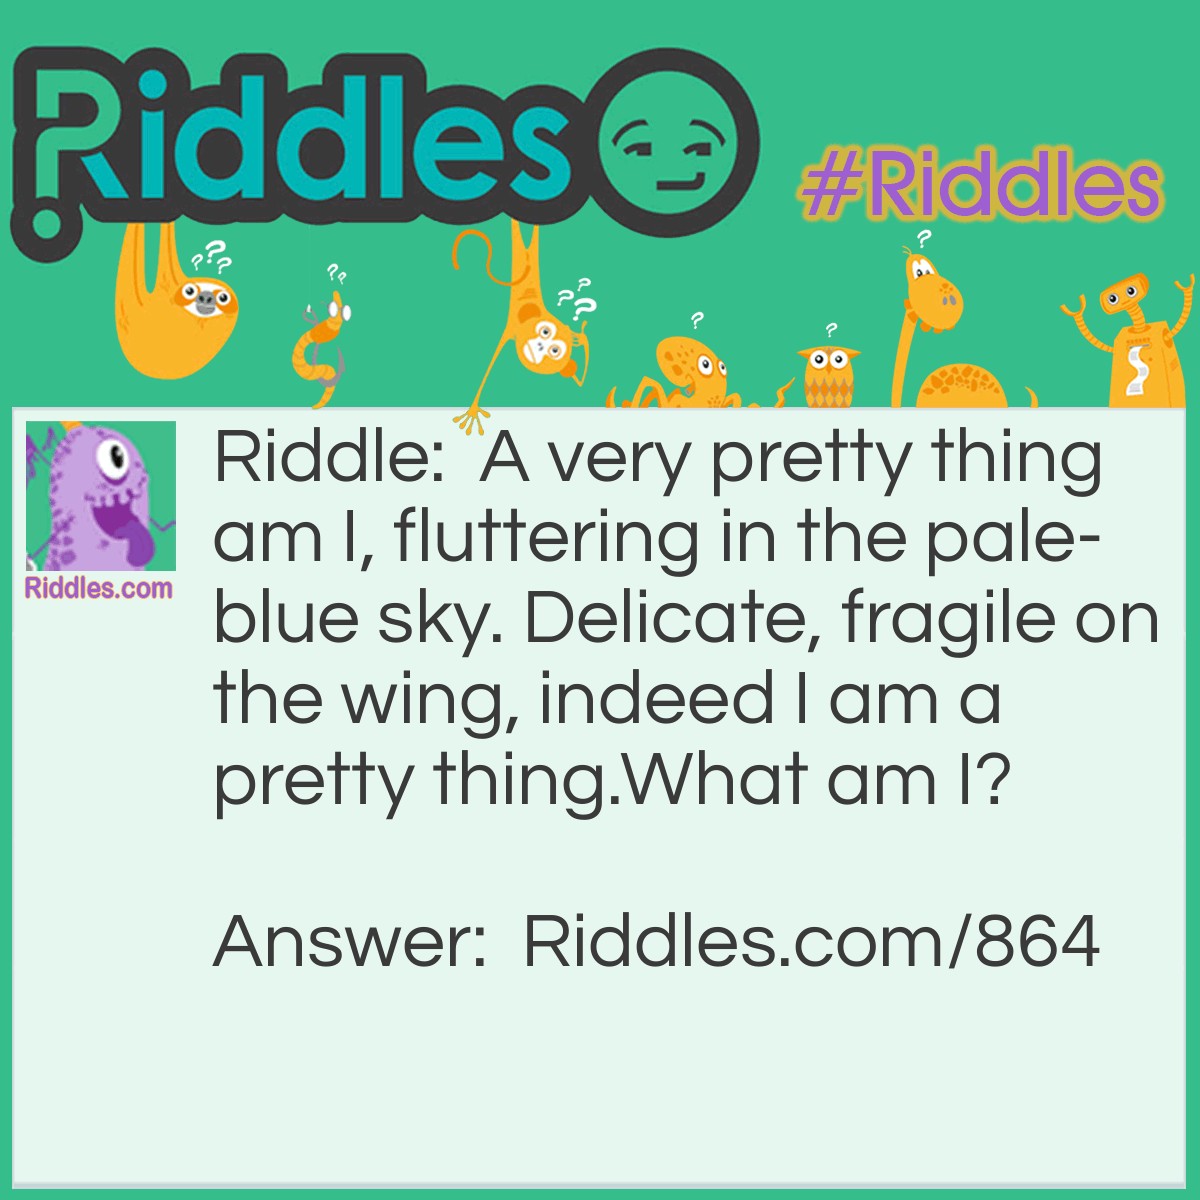 Riddle: A very pretty thing am I, fluttering in the pale-blue sky. Delicate, fragile on the wing, indeed I am a pretty thing.
What am I? Answer: A beautiful butterfly.